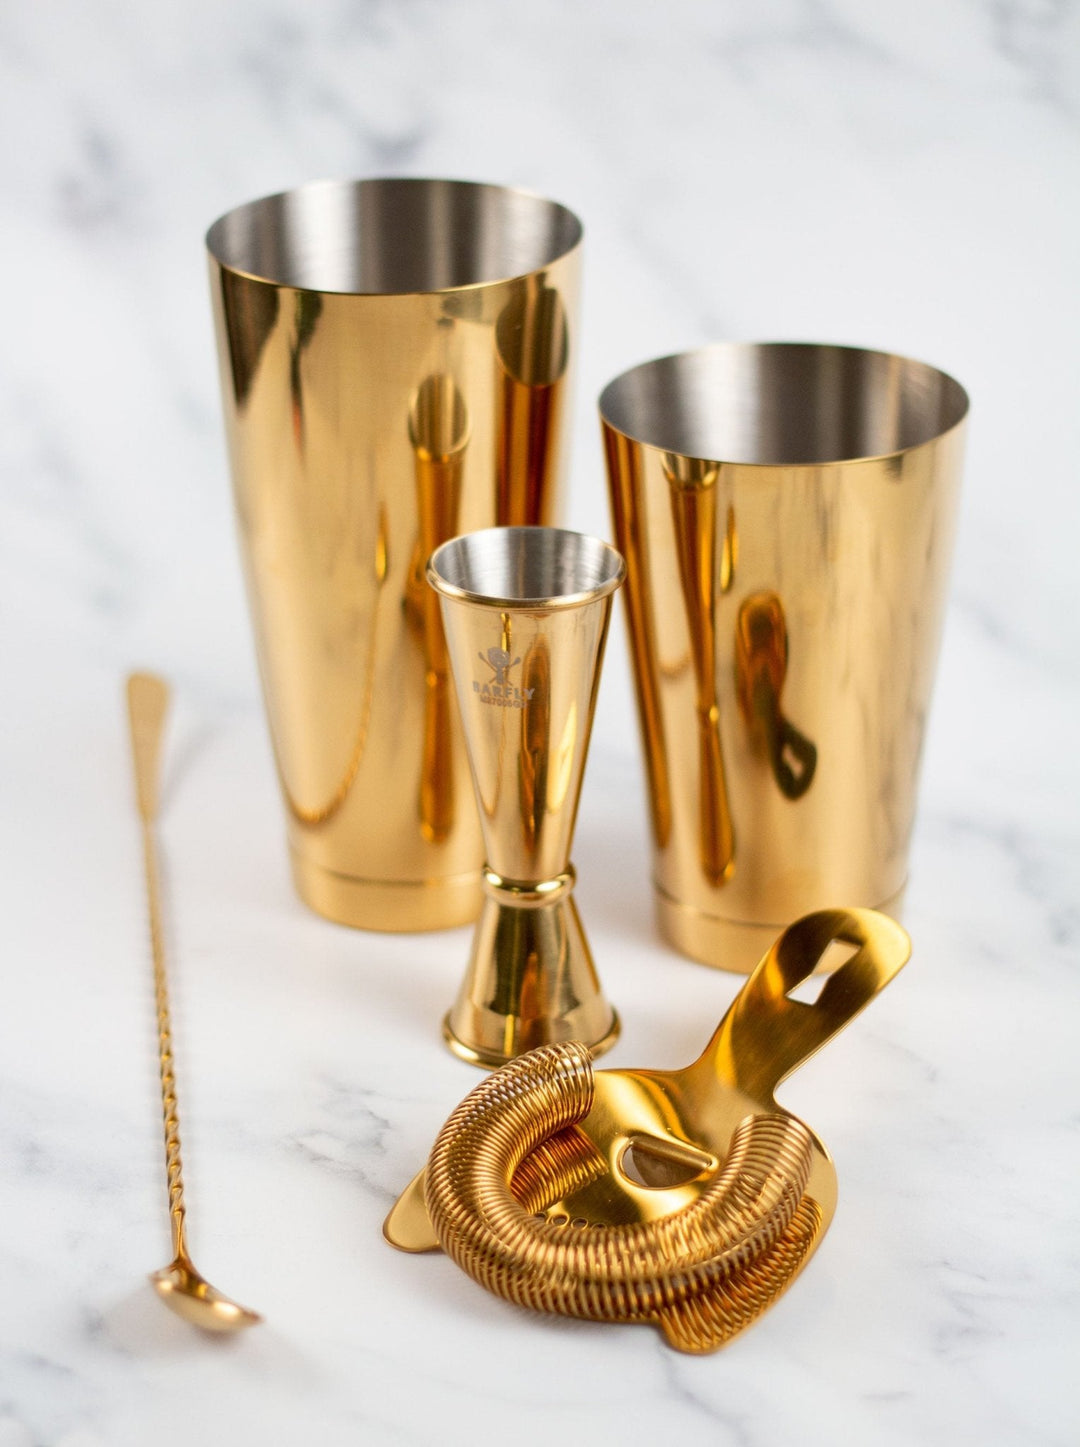 Barfly M37101GD Basic Cocktail Shaker Set in Gold Plated Finish